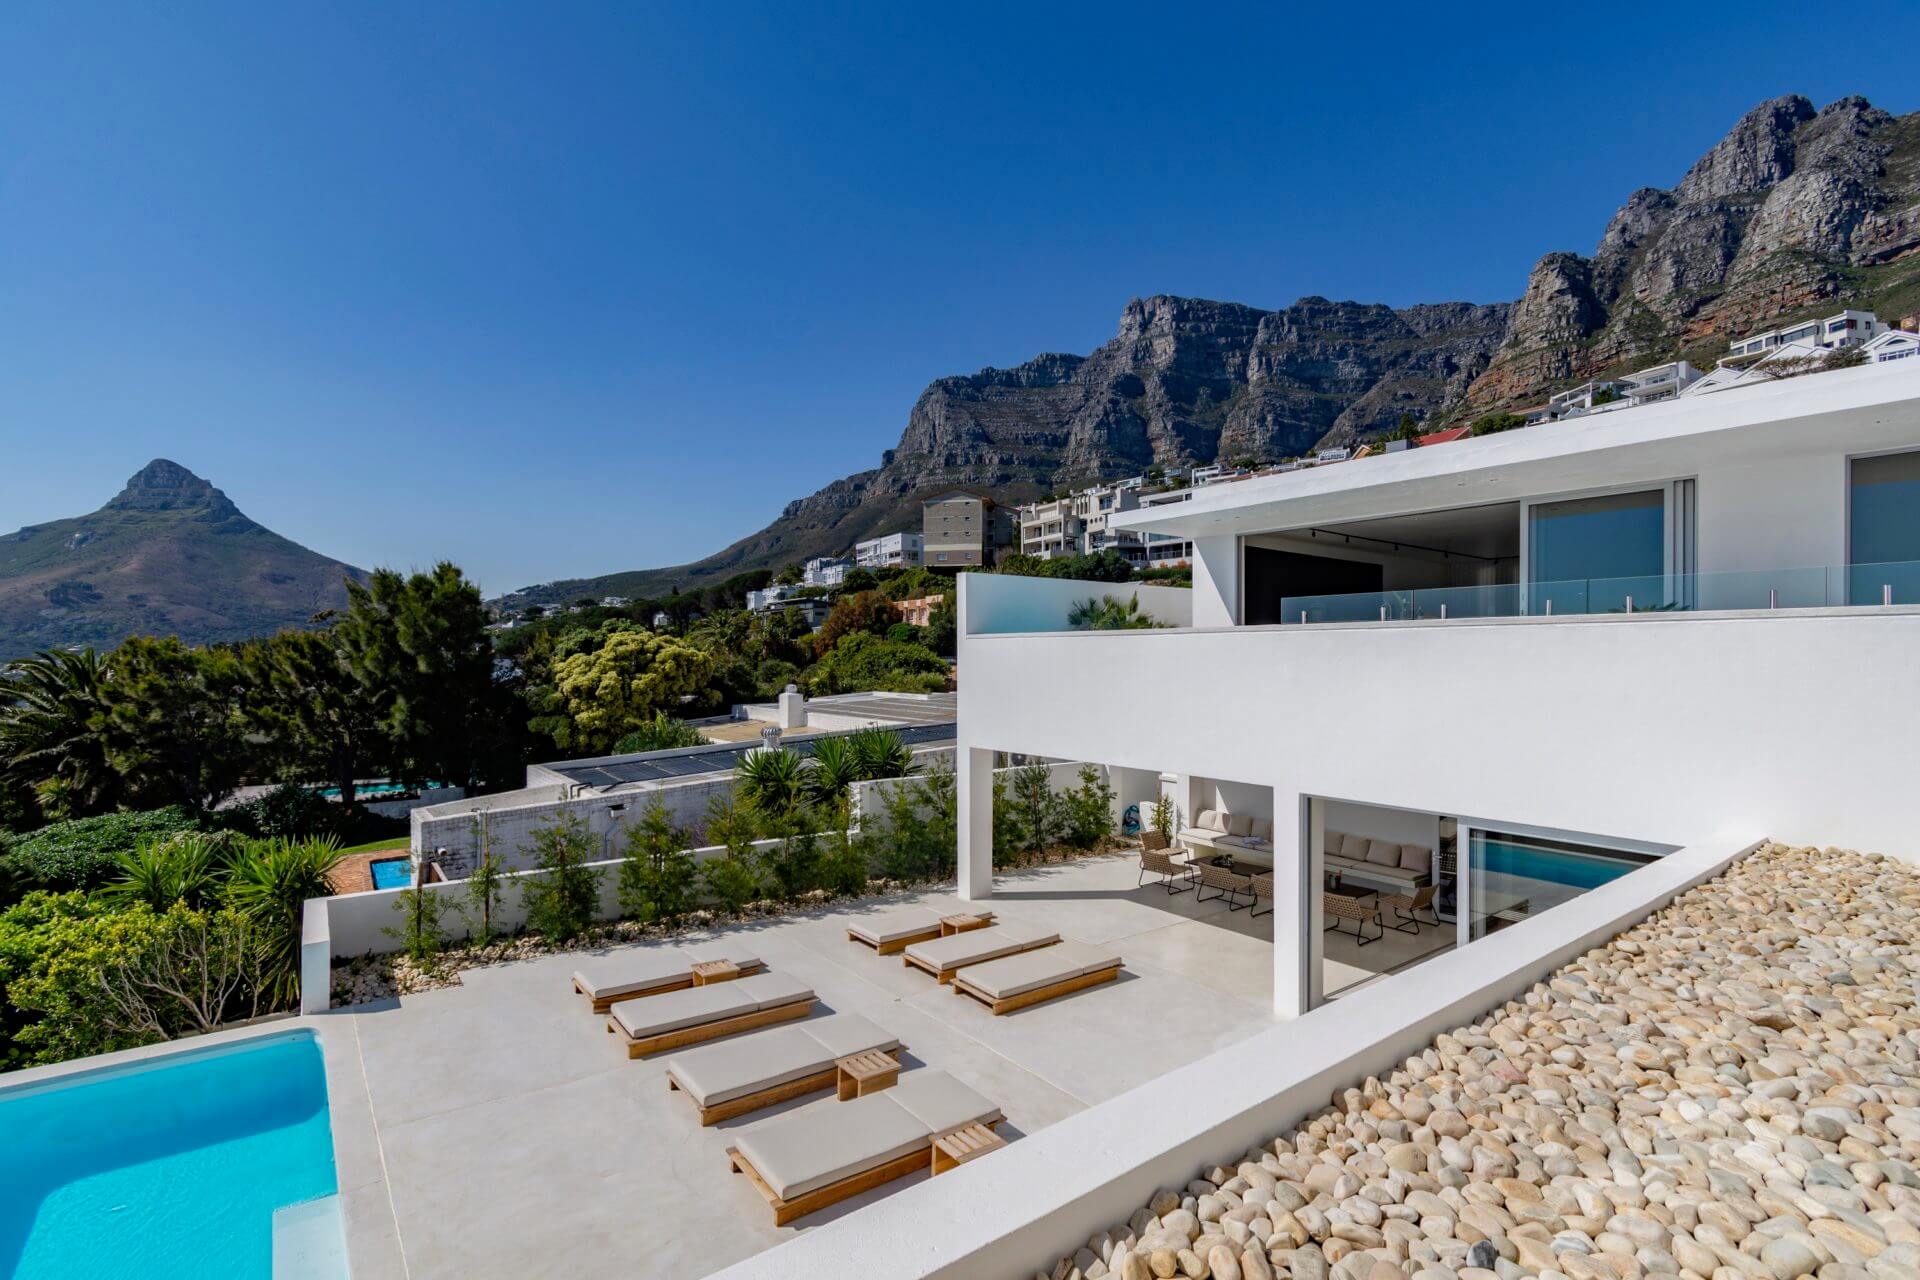 Photo 56 of Villa Ibiza accommodation in Camps Bay, Cape Town with 8 bedrooms and 8 bathrooms